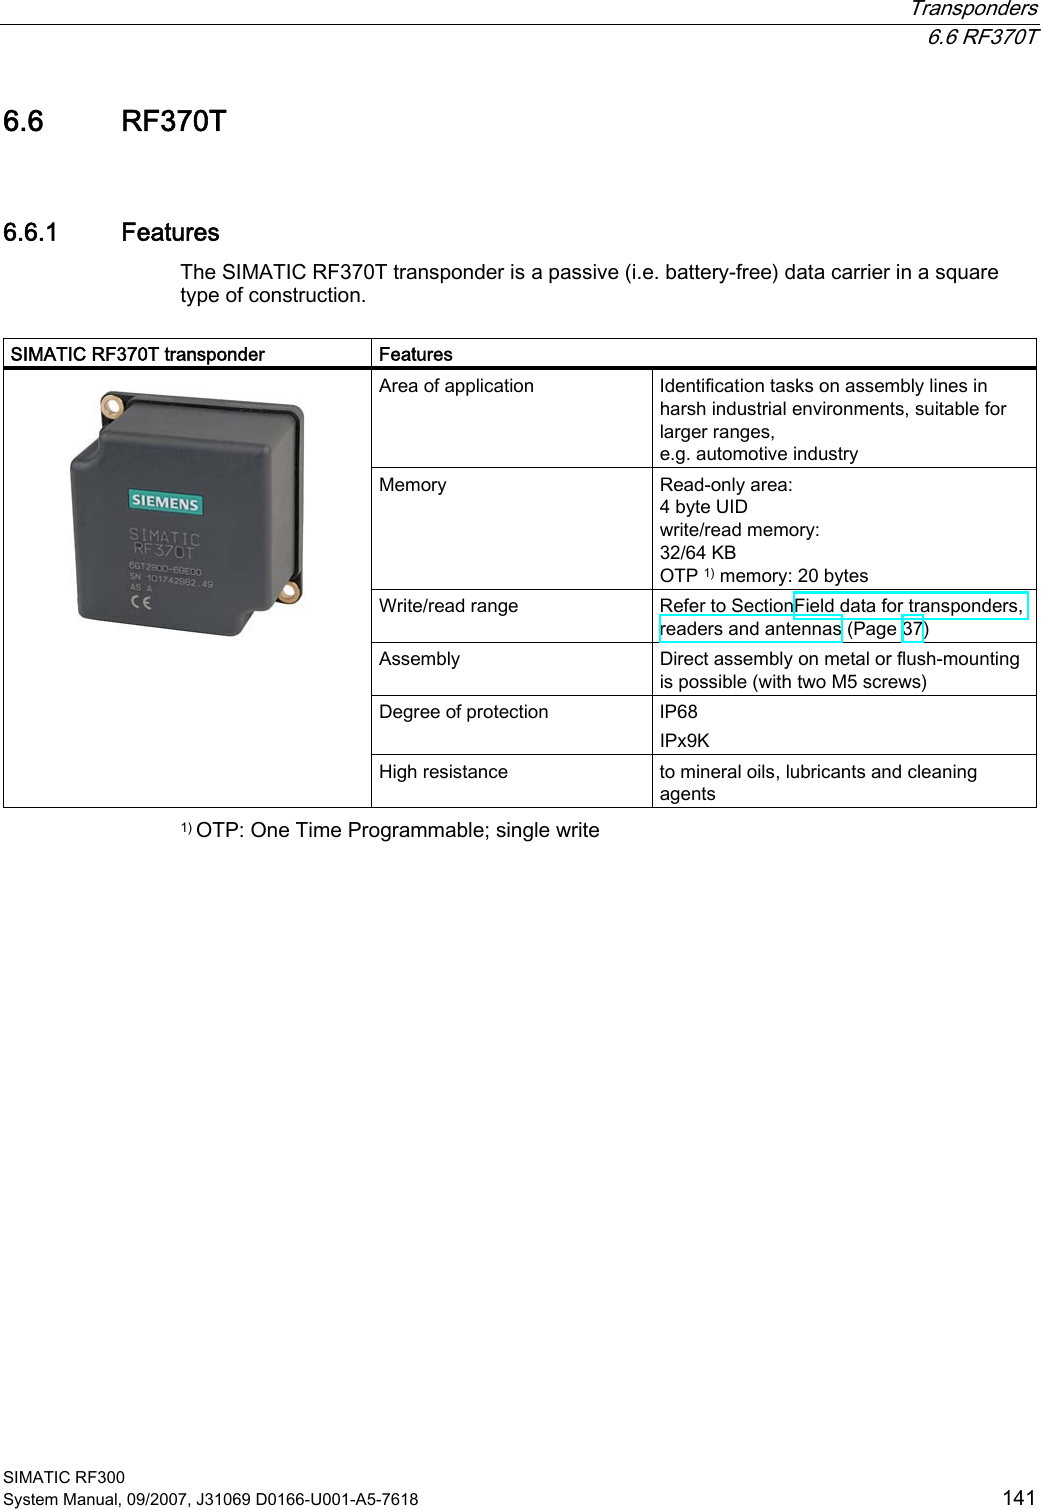  Transponders  6.6 RF370T SIMATIC RF300 System Manual, 09/2007, J31069 D0166-U001-A5-7618  141 6.6 RF370T 6.6.1 Features The SIMATIC RF370T transponder is a passive (i.e. battery-free) data carrier in a square type of construction.   SIMATIC RF370T transponder  Features Area of application  Identification tasks on assembly lines in harsh industrial environments, suitable for larger ranges,  e.g. automotive industry Memory  Read-only area: 4 byte UID write/read memory: 32/64 KB OTP 1) memory: 20 bytes Write/read range  Refer to SectionField data for transponders, readers and antennas (Page 37) Assembly  Direct assembly on metal or flush-mounting is possible (with two M5 screws) Degree of protection  IP68 IPx9K    High resistance  to mineral oils, lubricants and cleaning agents 1) OTP: One Time Programmable; single write 